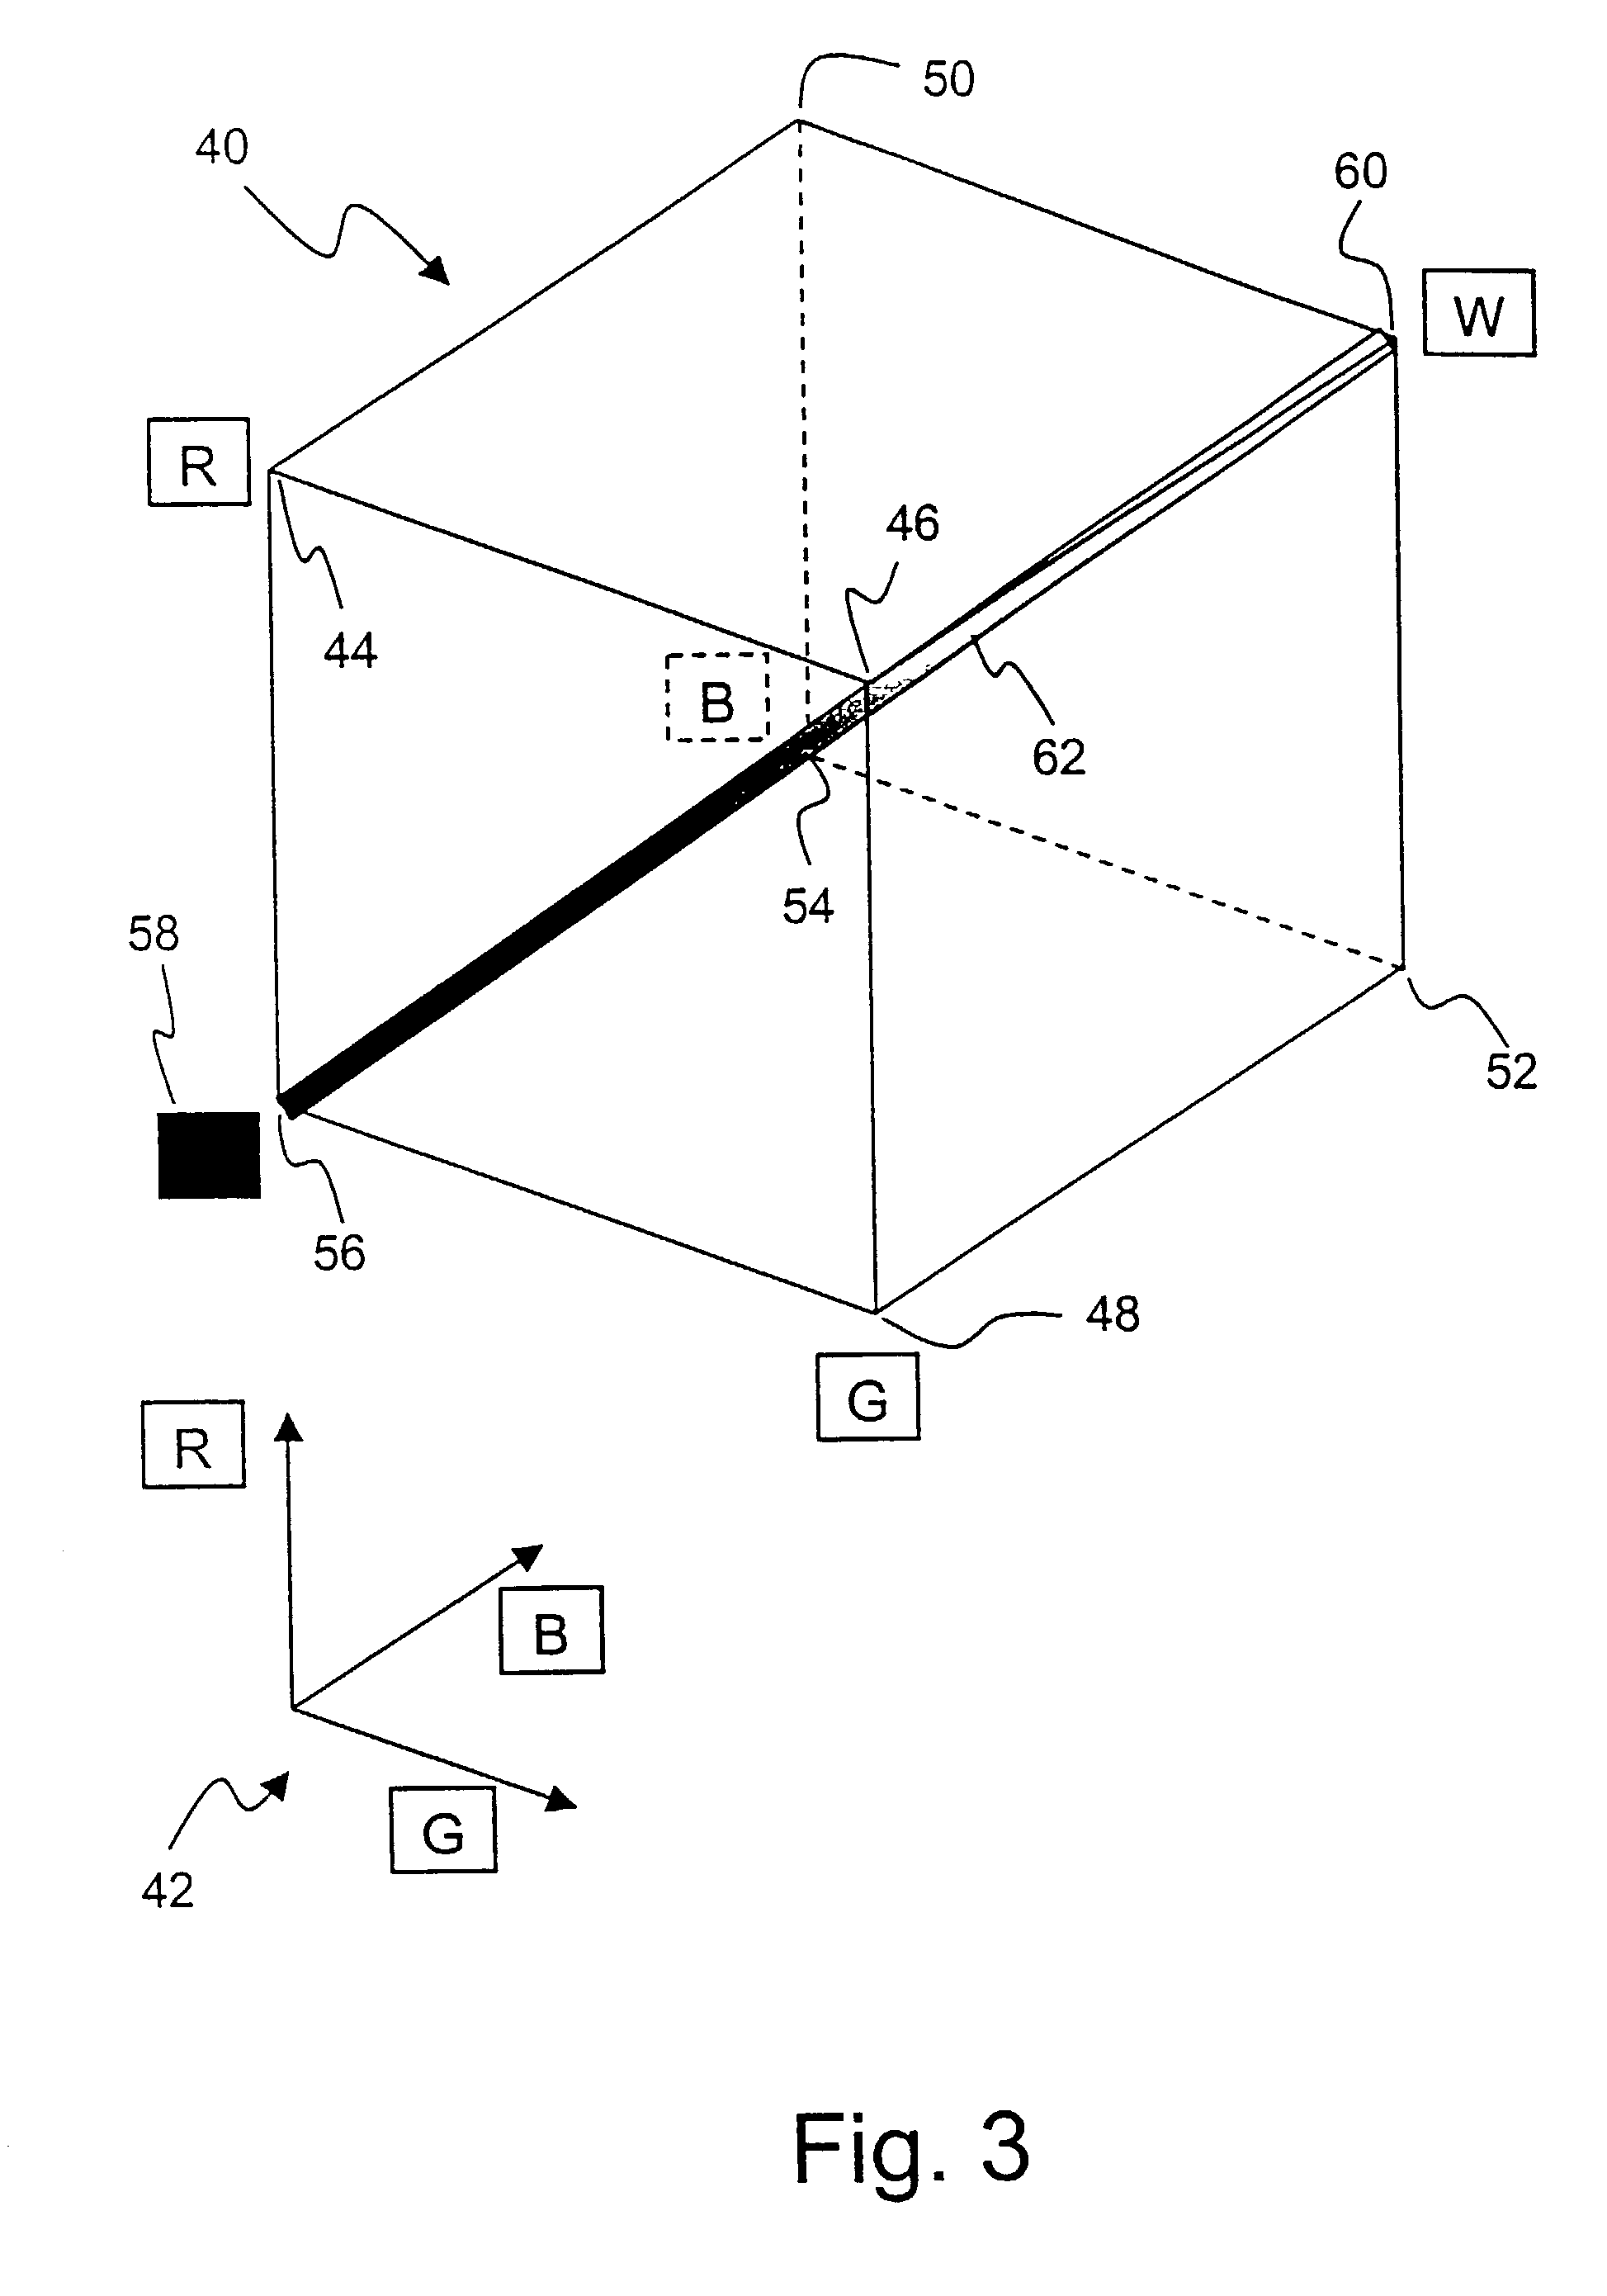 Method and apparatus for modifying the color saturation of electronically acquired images